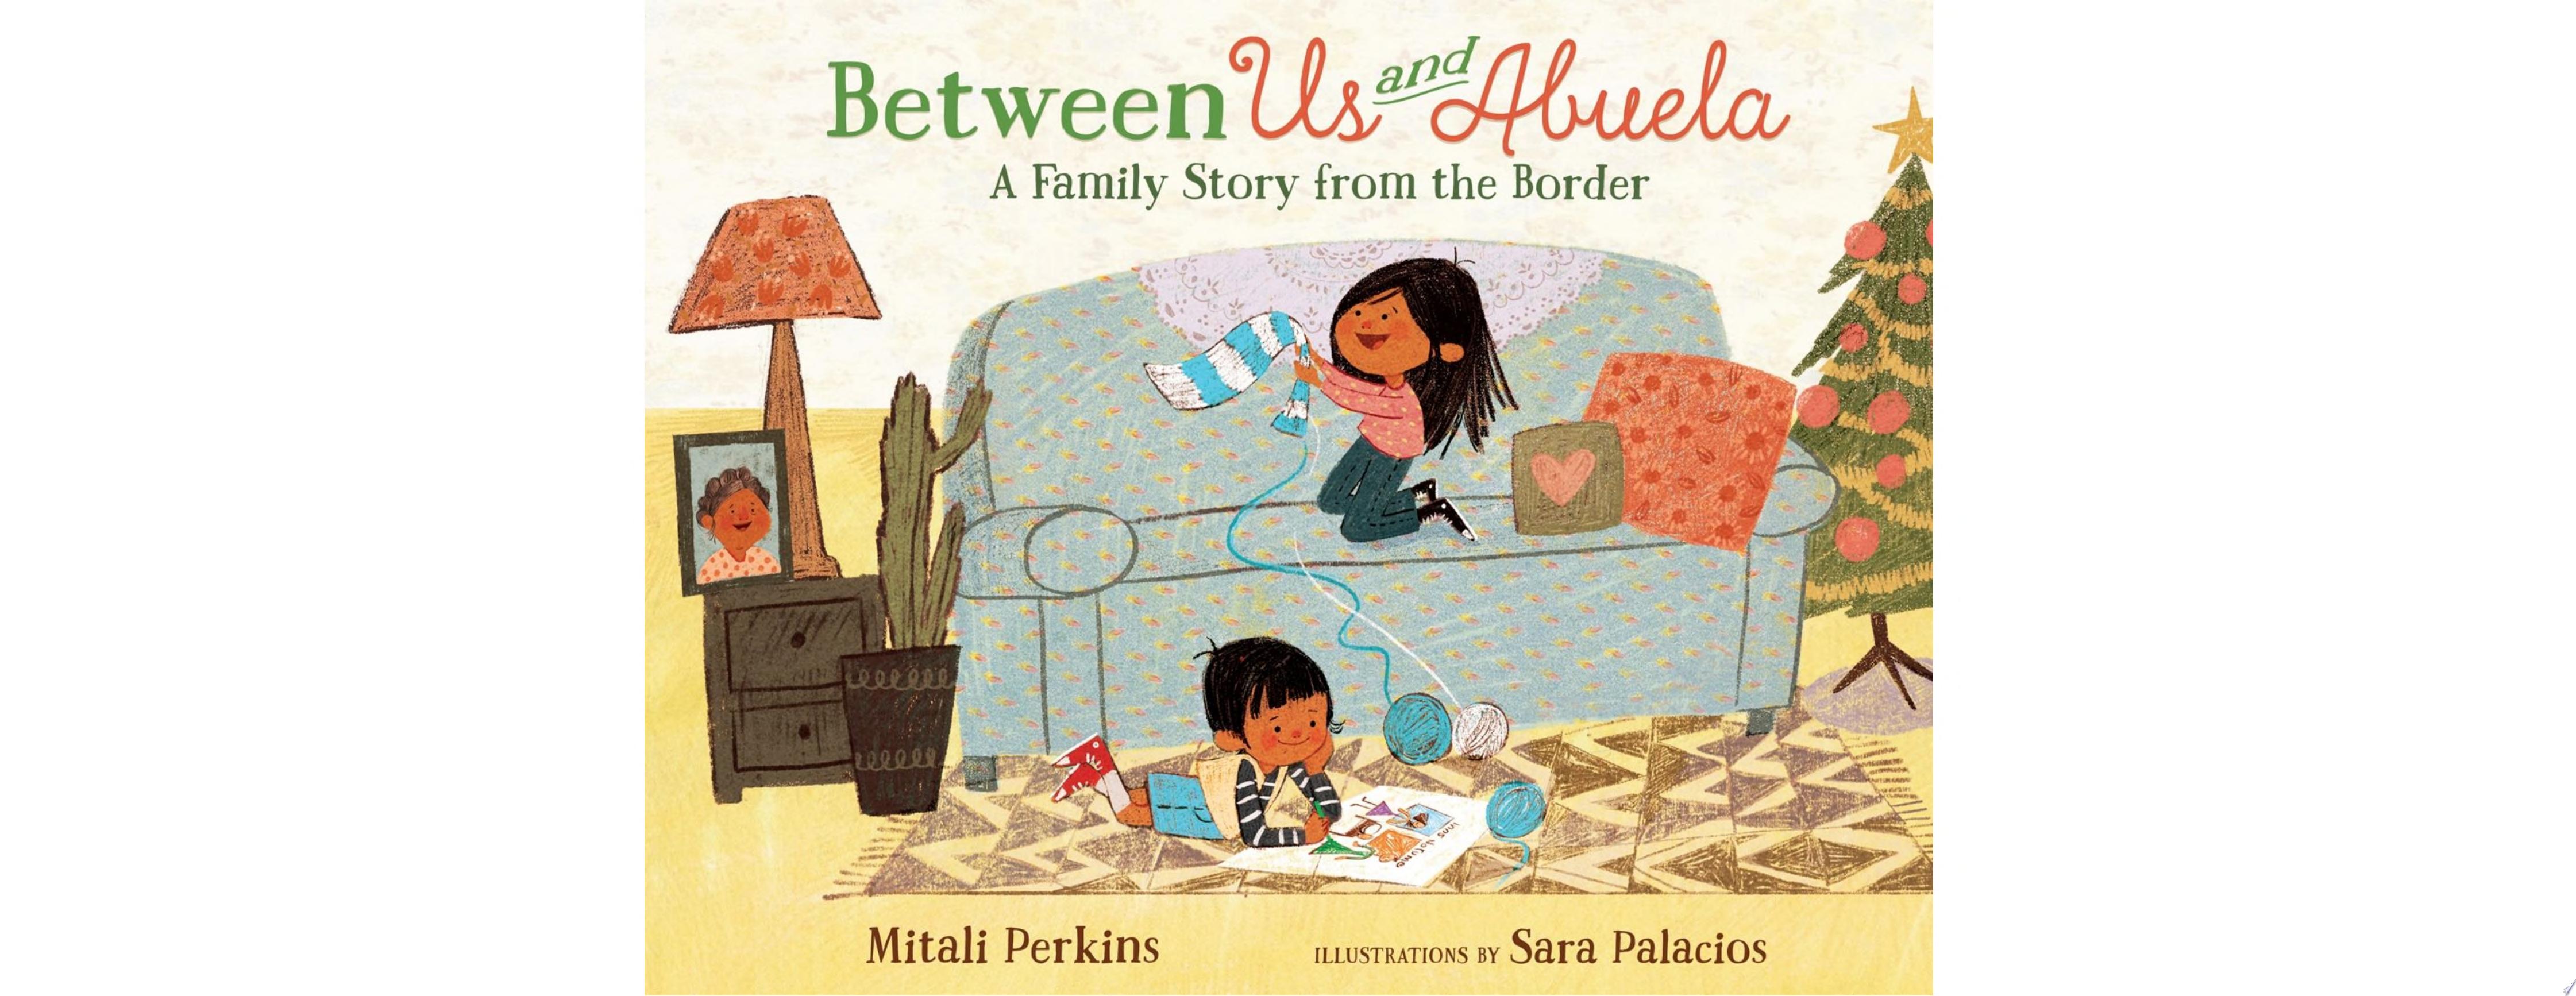 Image for "Between Us and Abuela"